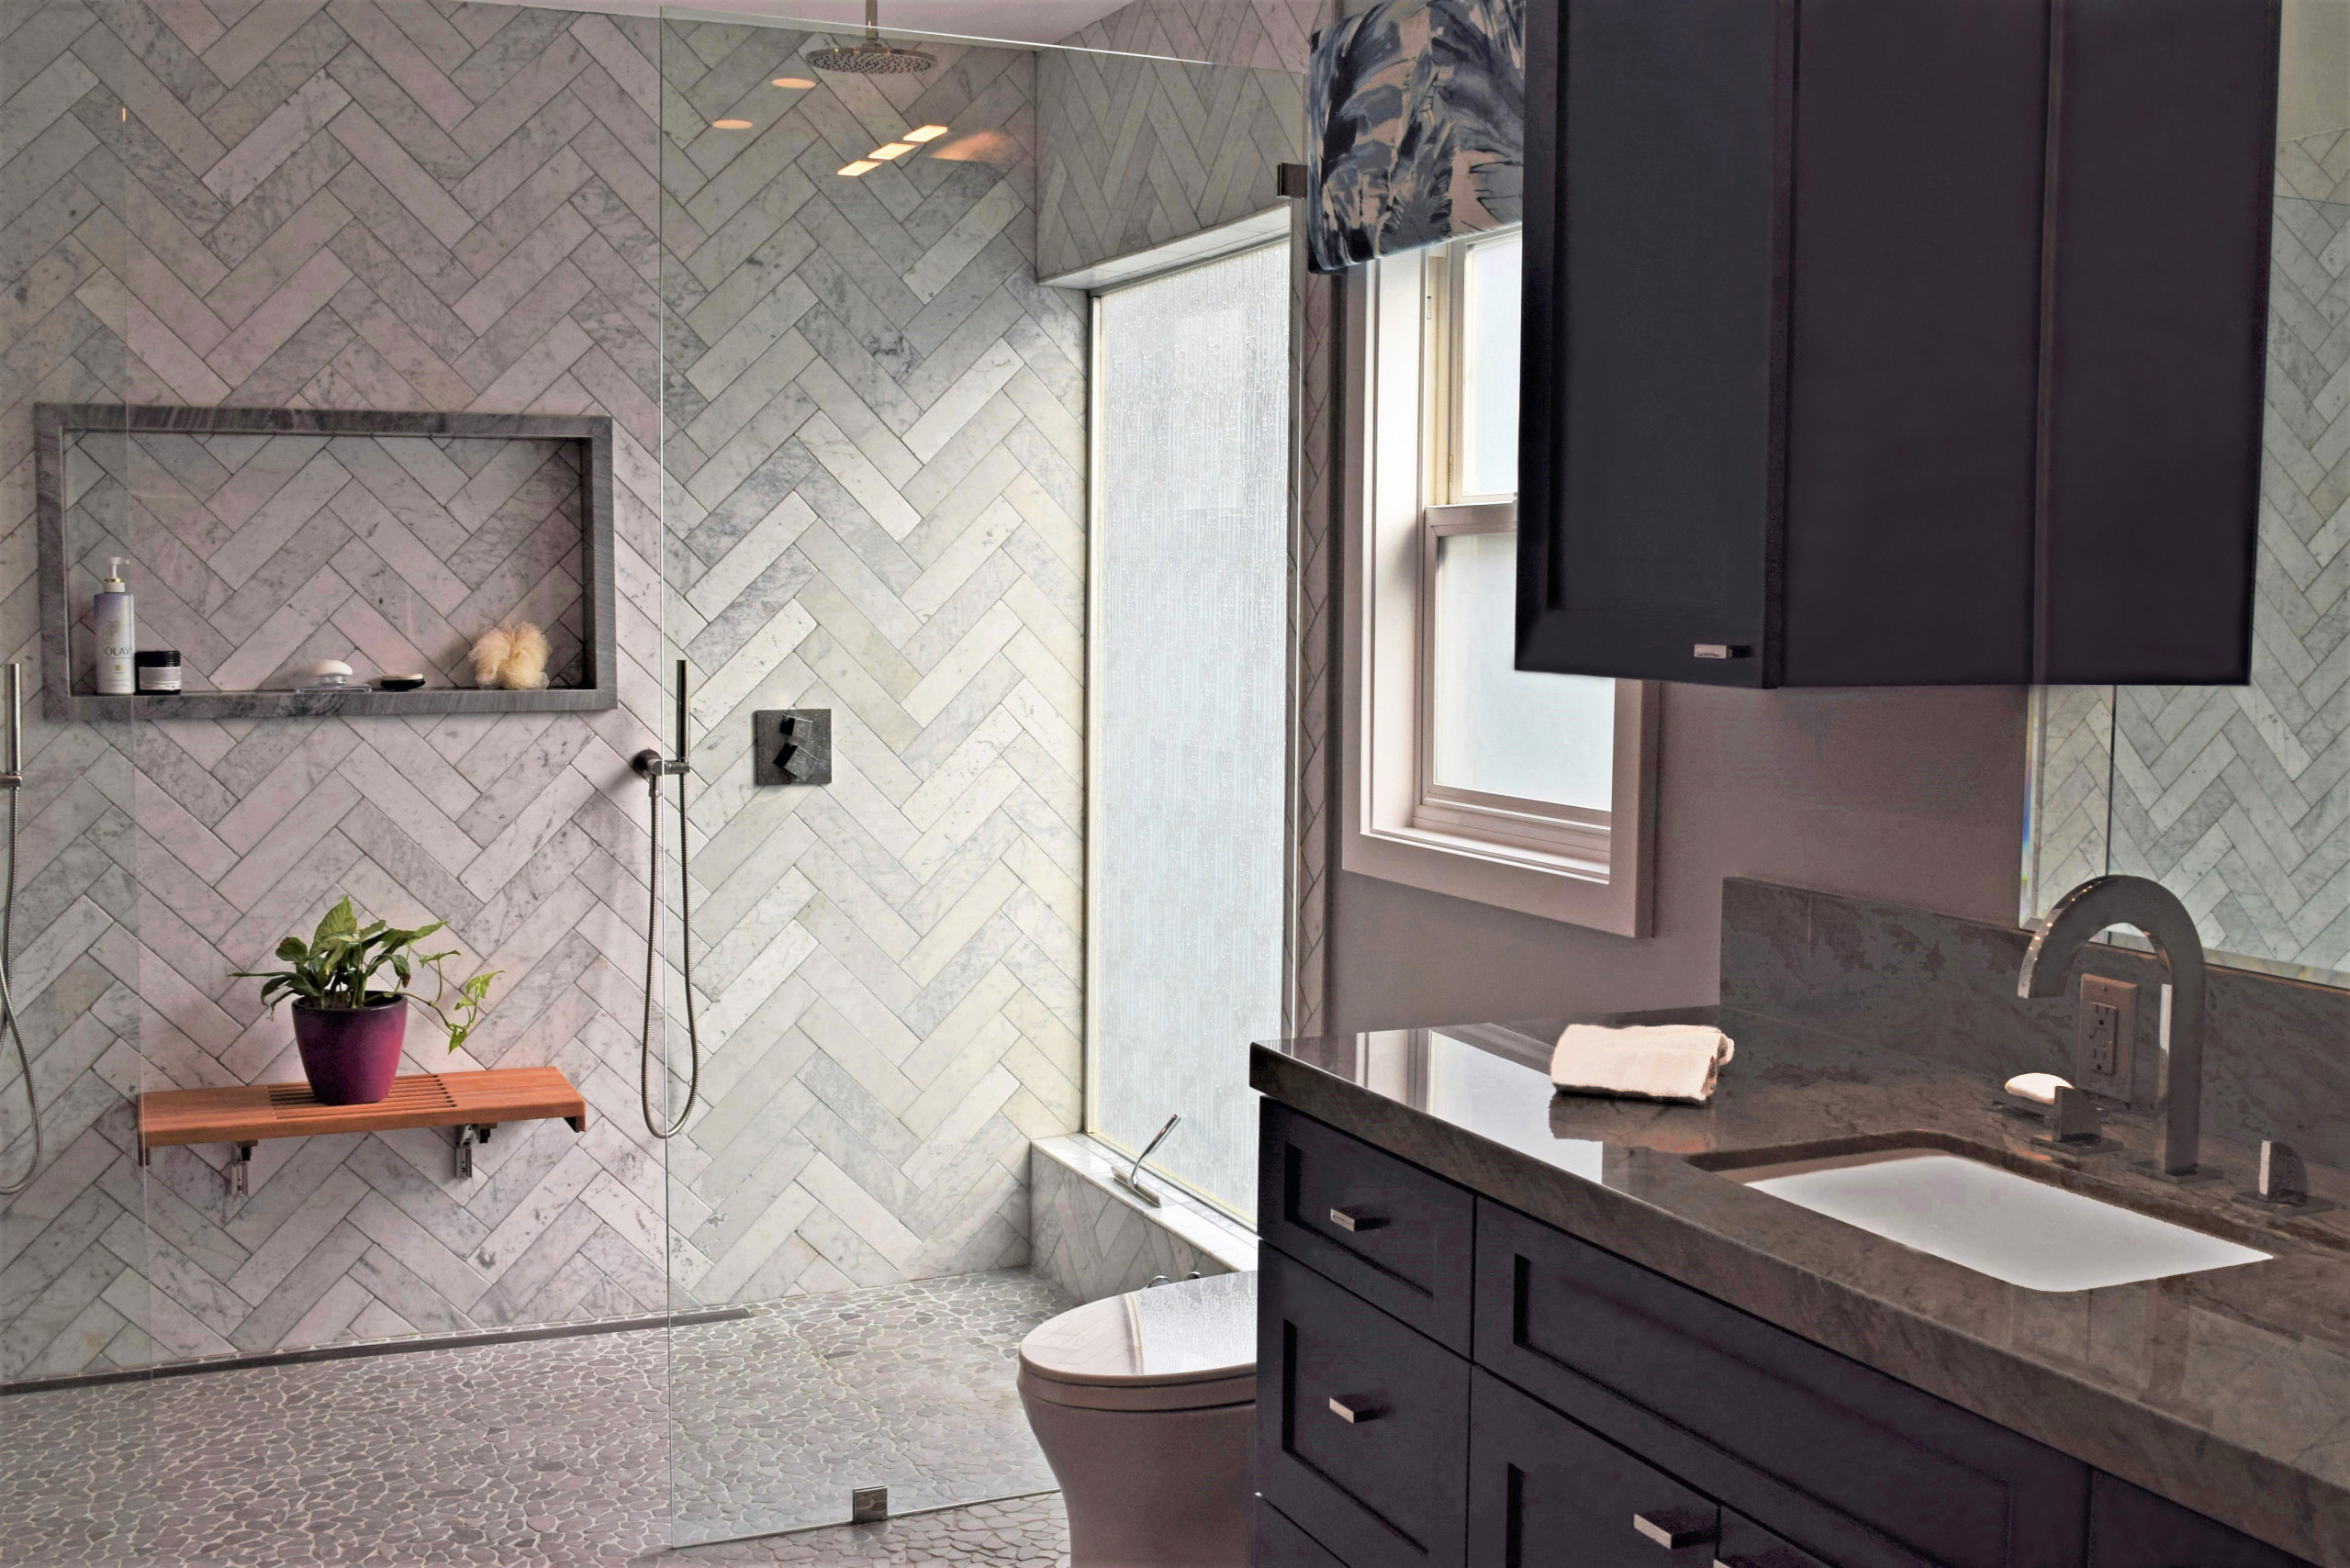 My Contemporary Master Bath Remodel for a Client in Sherman Oaks, Ca.